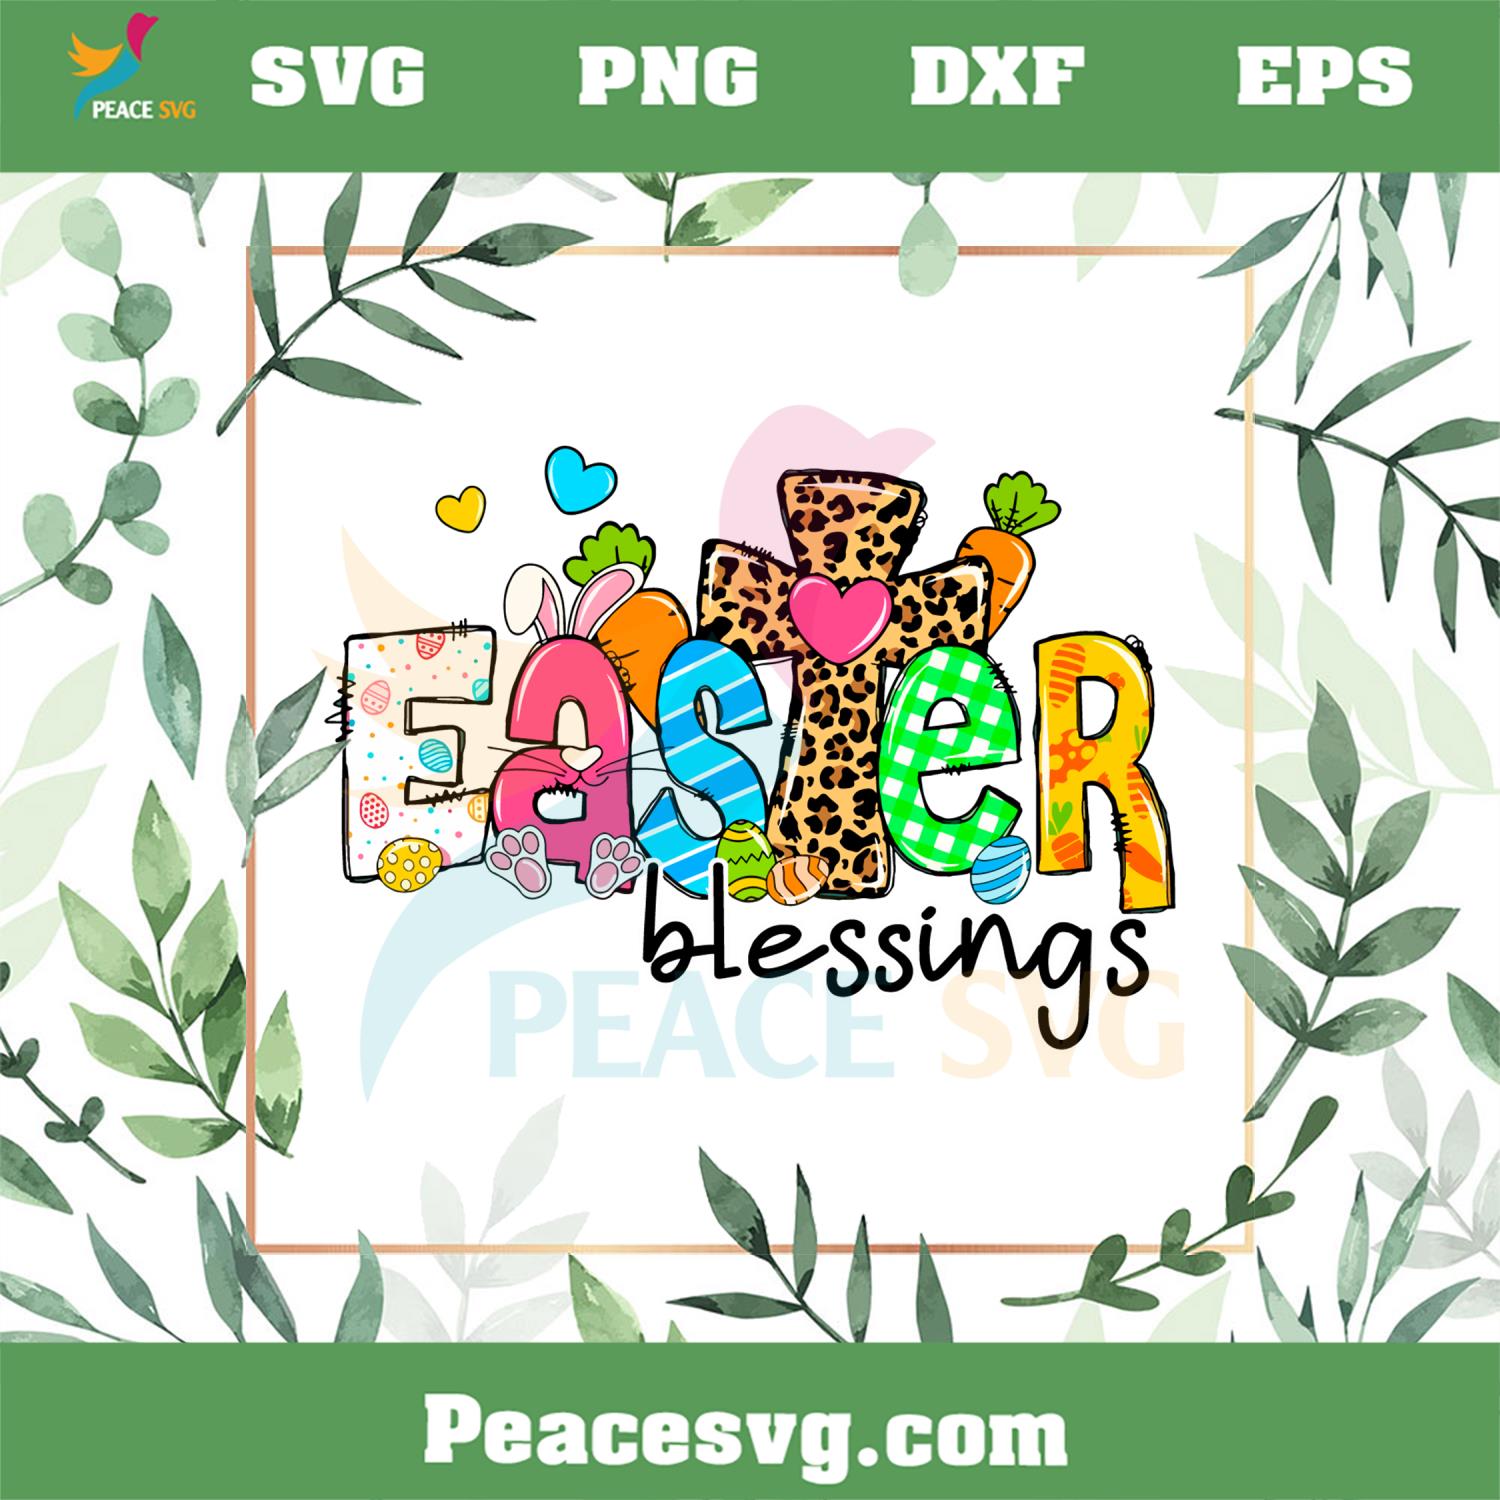 Retro Easter Blessings PNG Files for Cricut Sublimation Files